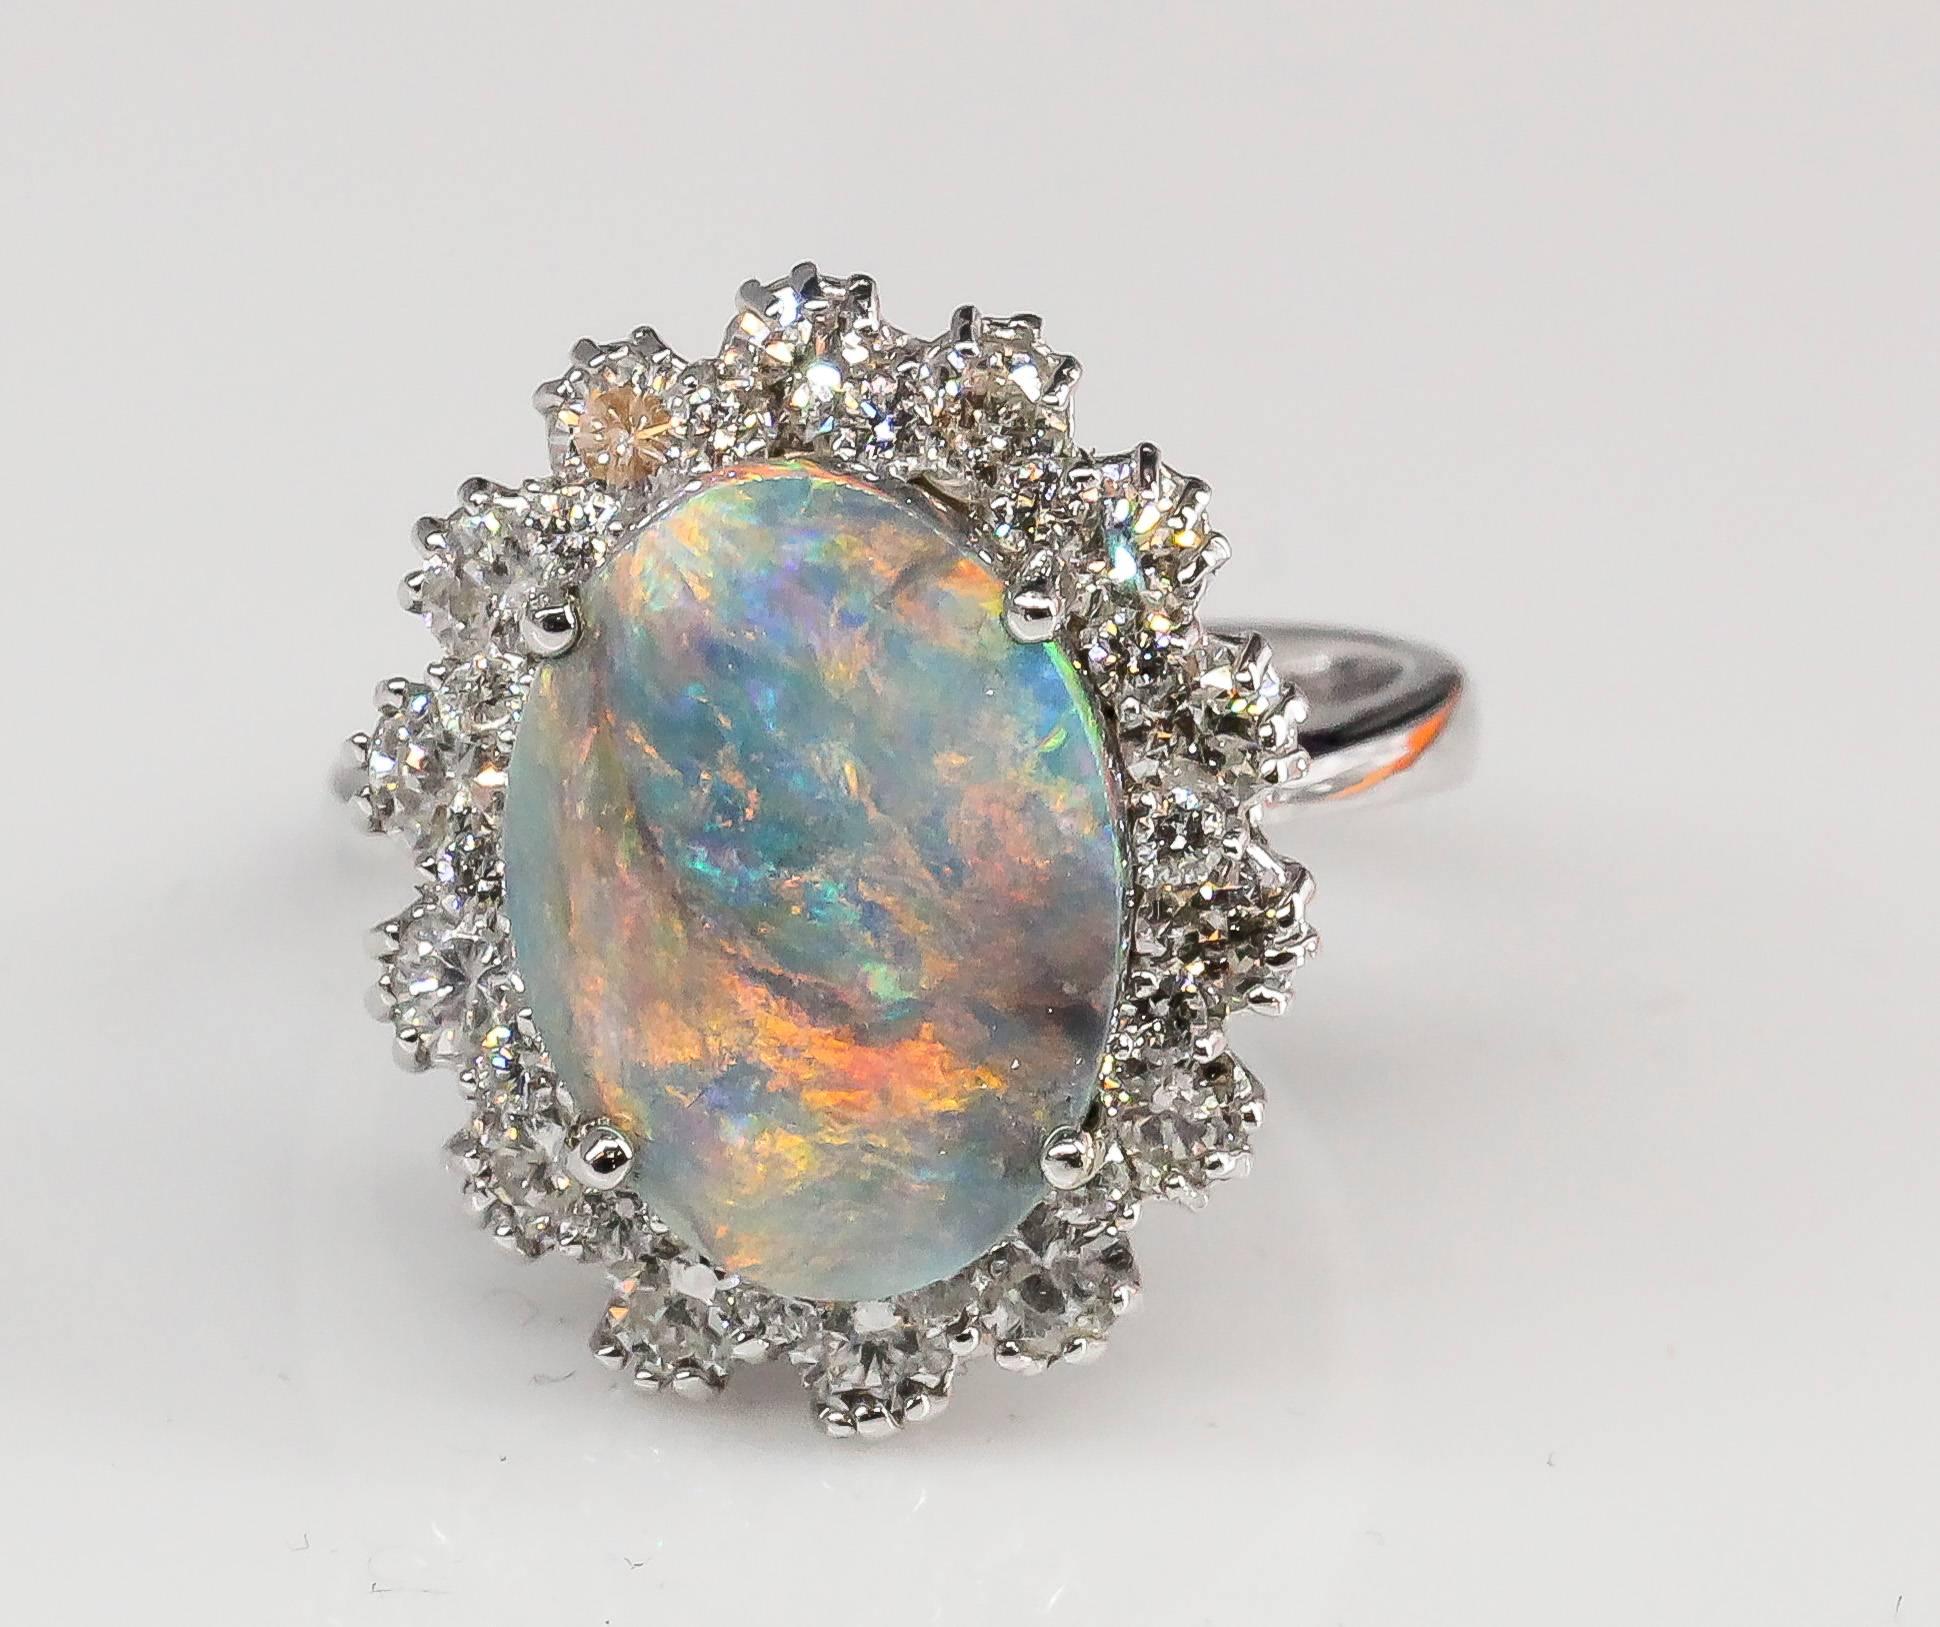 Chic black opal, diamond and 18K white gold dome ring. It features a large oval shaped approx. 4.50 carat black opal as the focal point and flanked by approx. 1.00 carats of high grade round brilliant cut diamonds,  all set in 18K white gold.